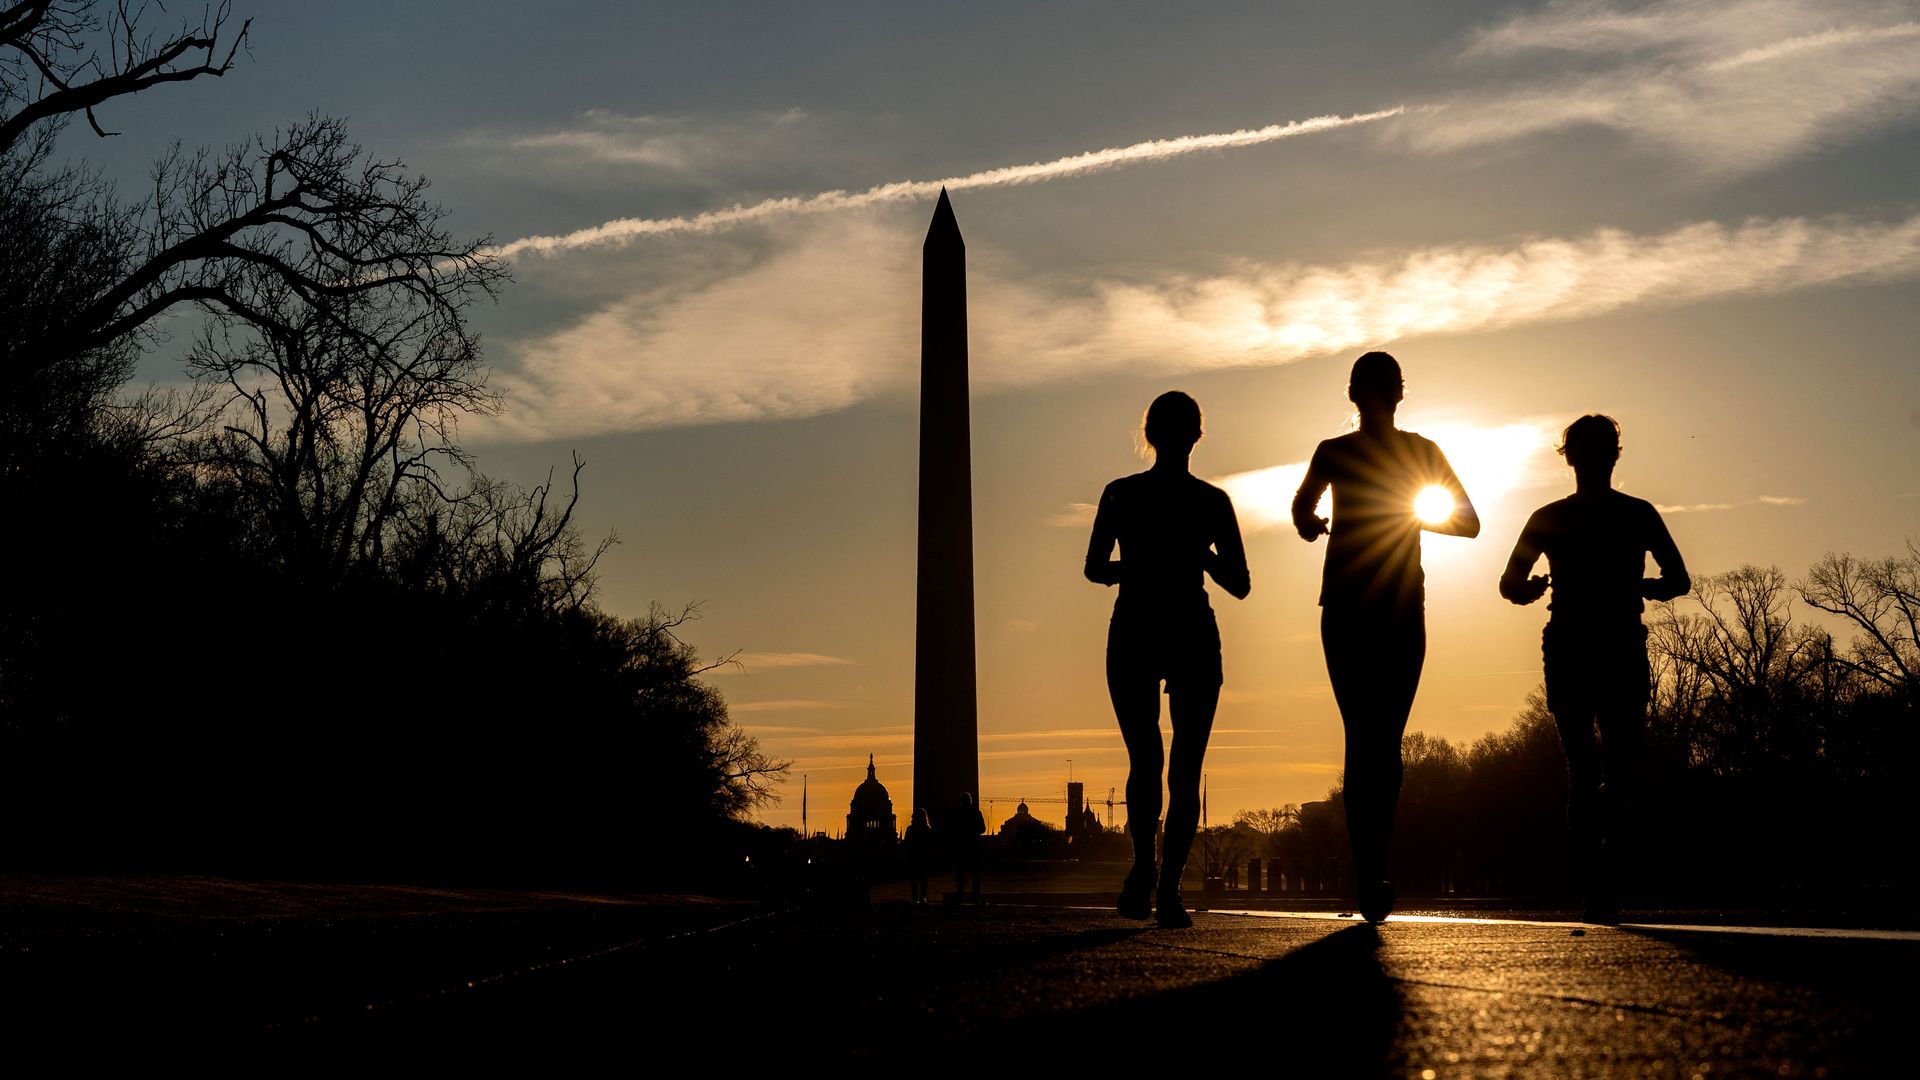 Joggers are seen at sunrise running alongside the Reflecting Pool.